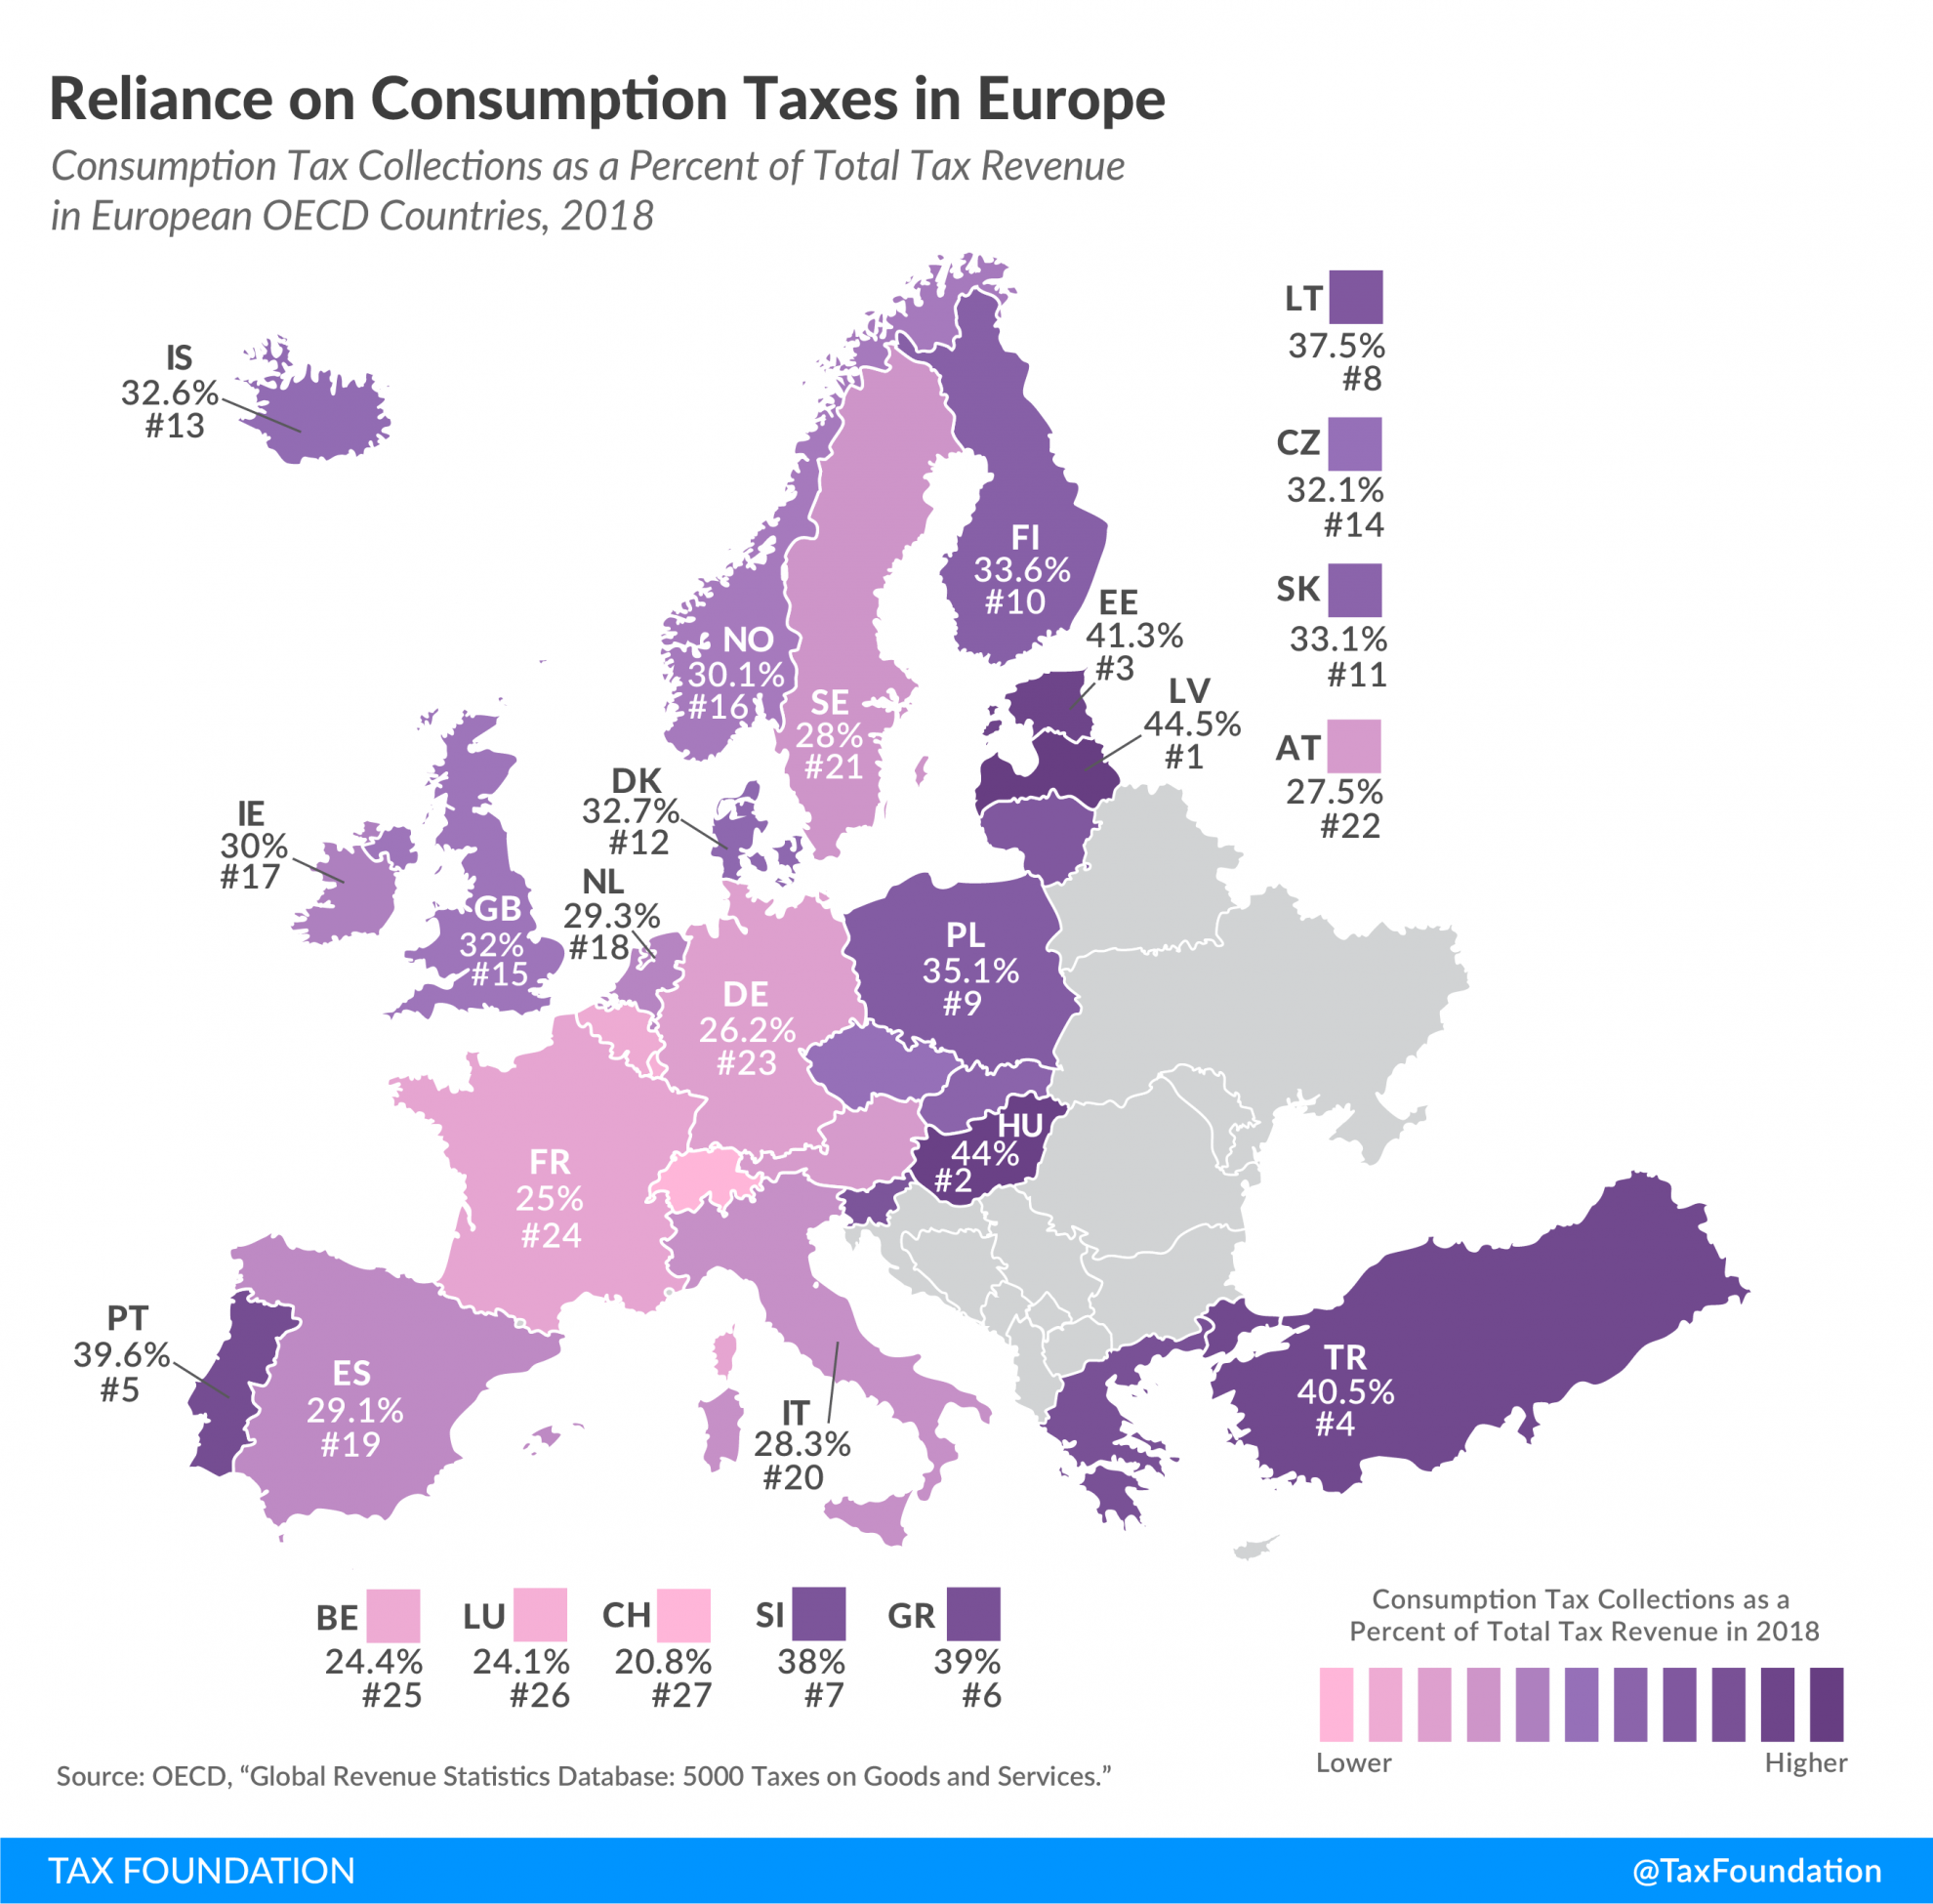 Consumption Taxes in Europe, Consumption Tax Revenue in Europe, Consumption Tax Reliance in Europe, Reliance on consumption taxes in Europe